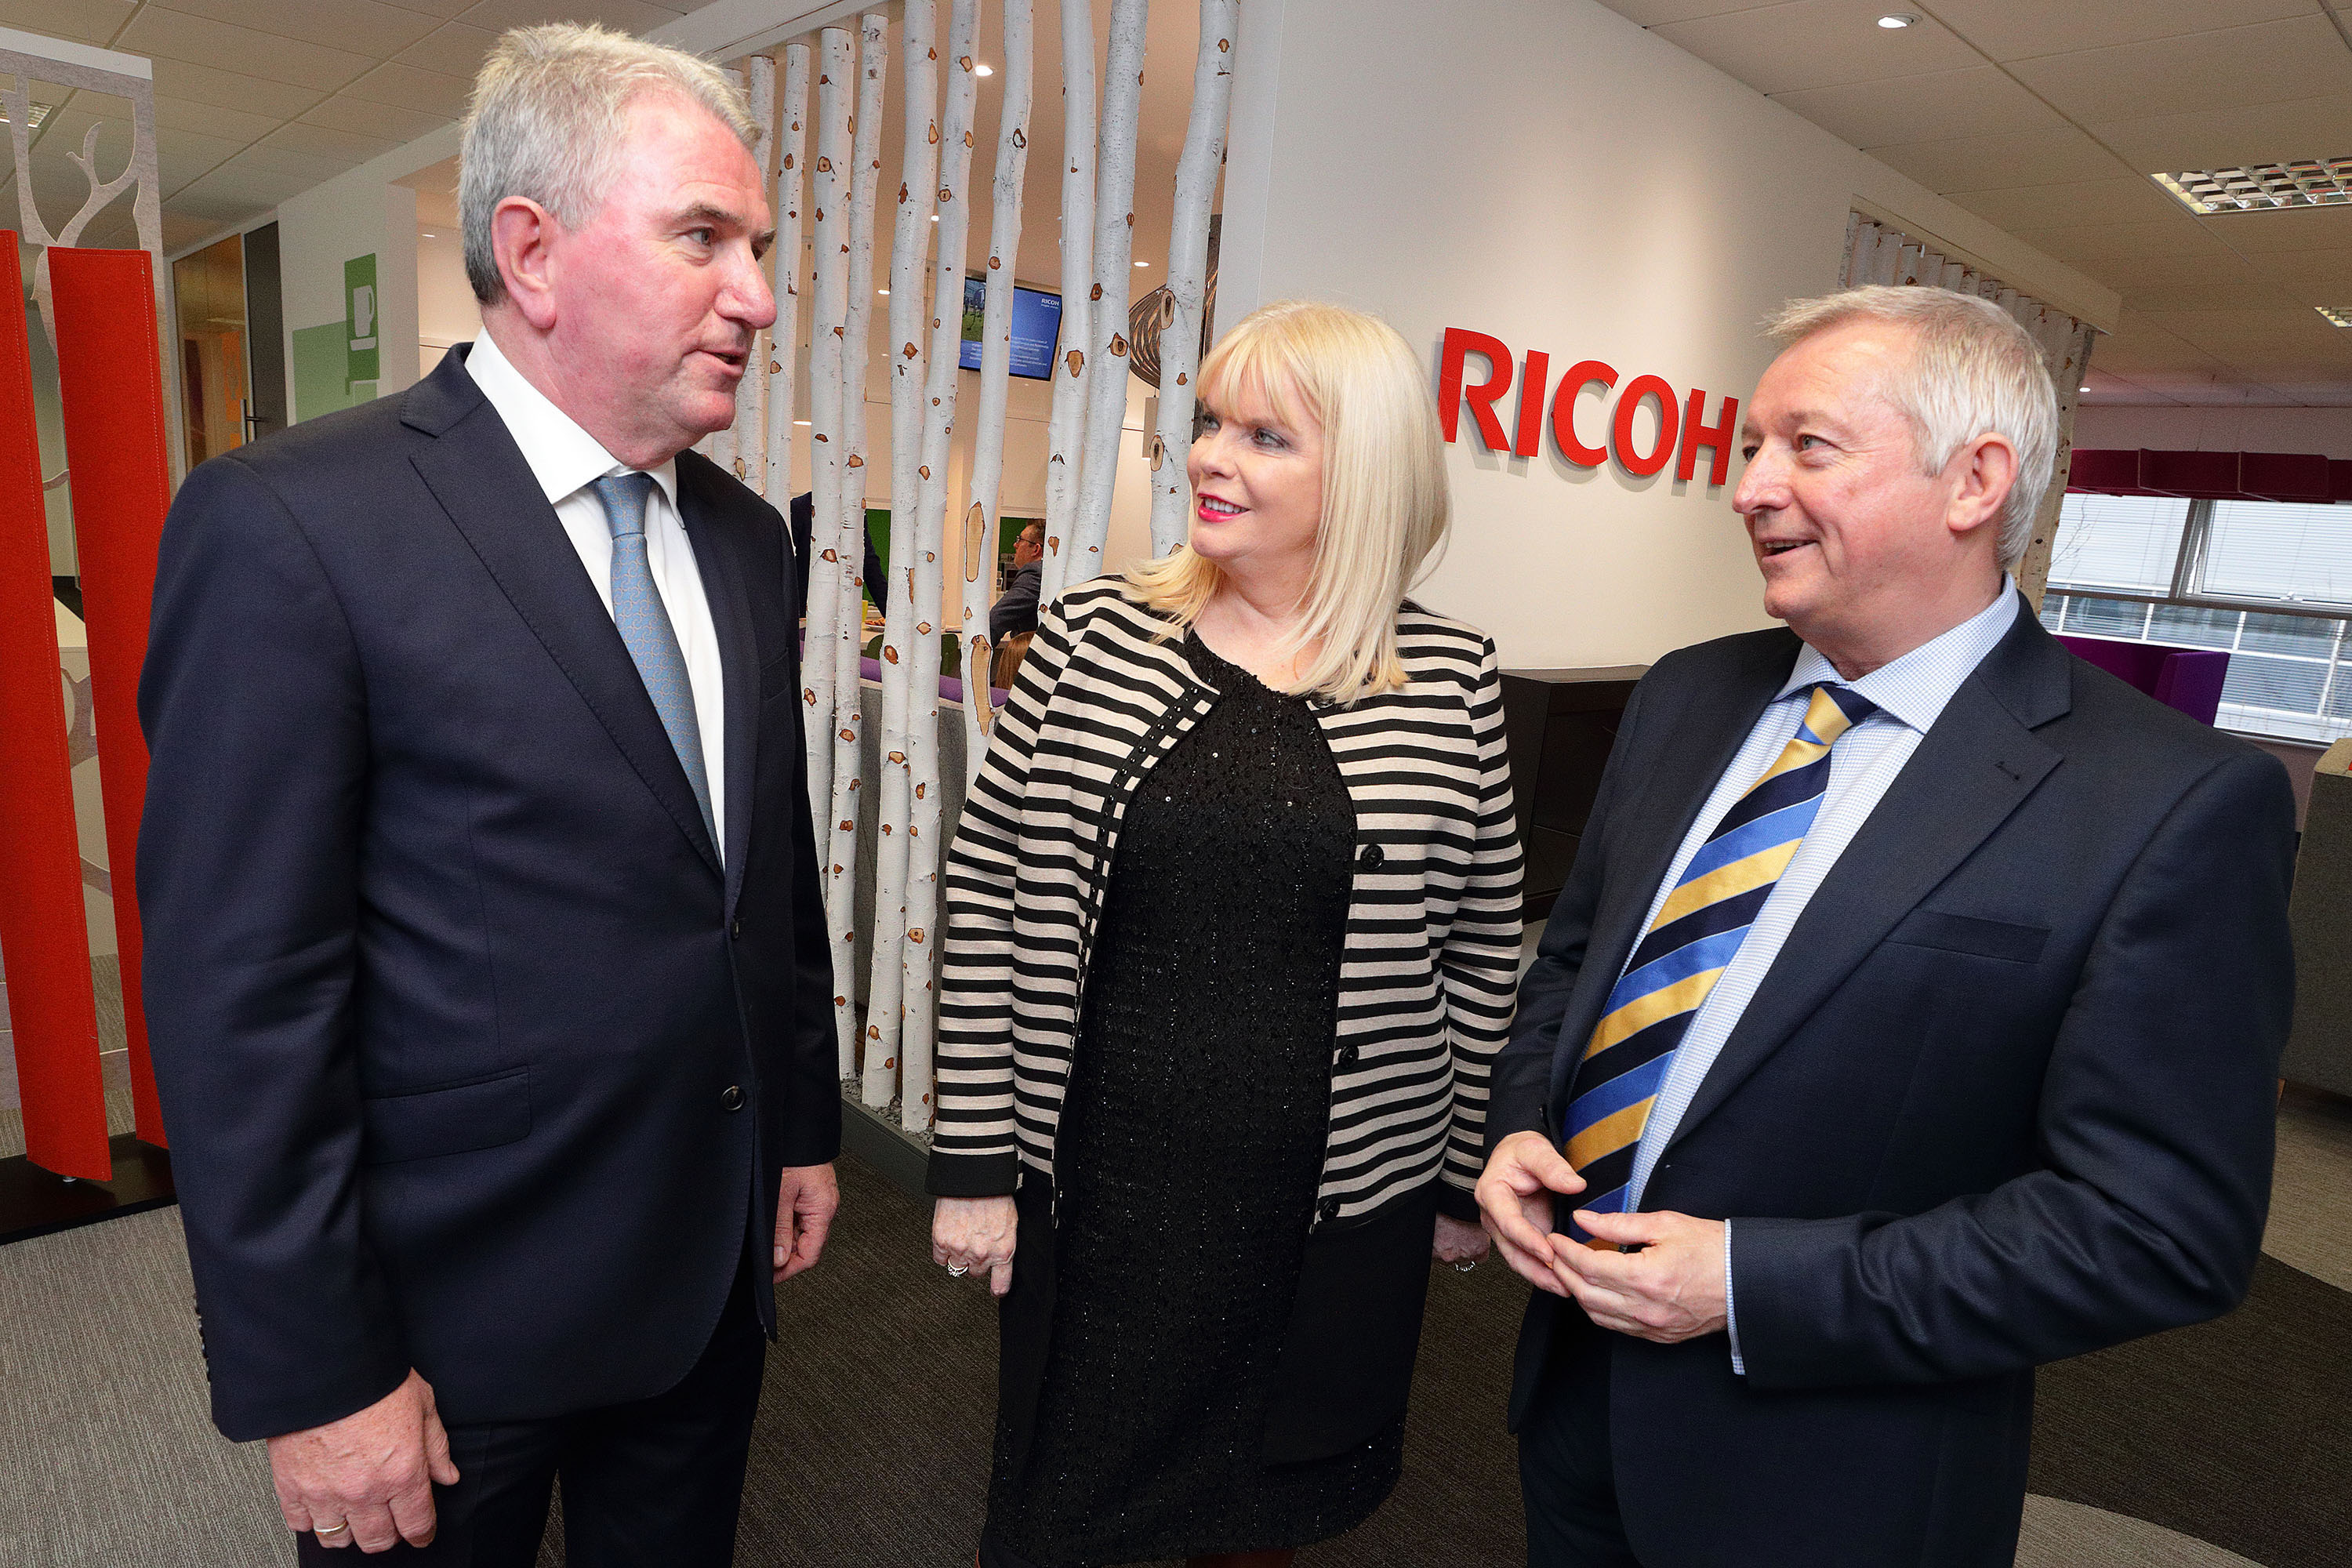 (1)	Pictured at the opening of Ricoh's new Irish headquarters in Airside Business Park, Swords, Co. Dublin are (L to R) Phil Keoghan, CEO, Ricoh UK and Ireland; Minister for Jobs, Enterprise & Innovation, Mary Mitchell O’Connor TD; and Gary Hopwood, General Manager, Ricoh Ireland